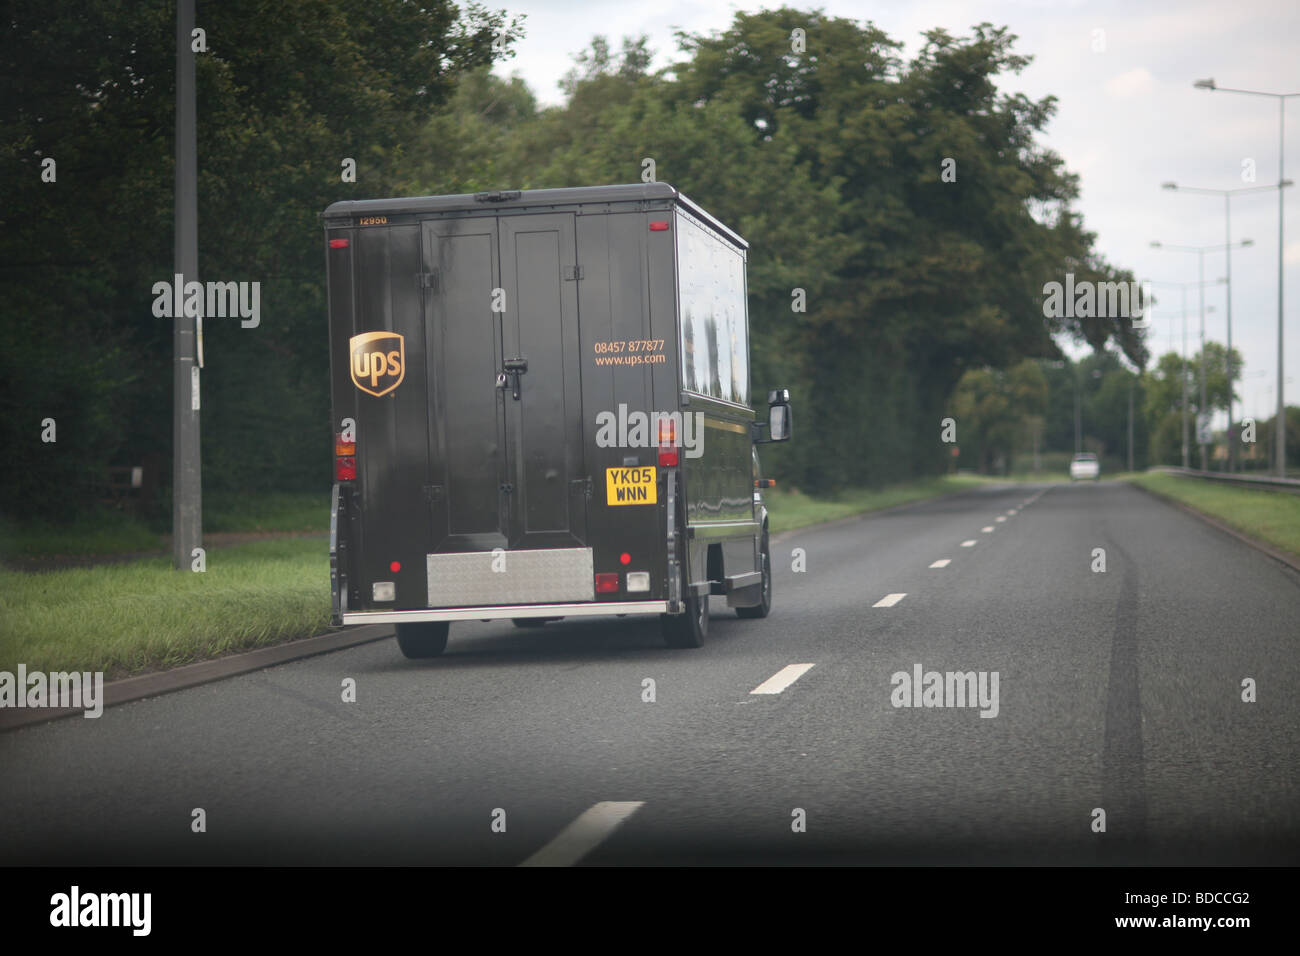 A UPS parcels delivery van in transit on a UK road Stock Photo